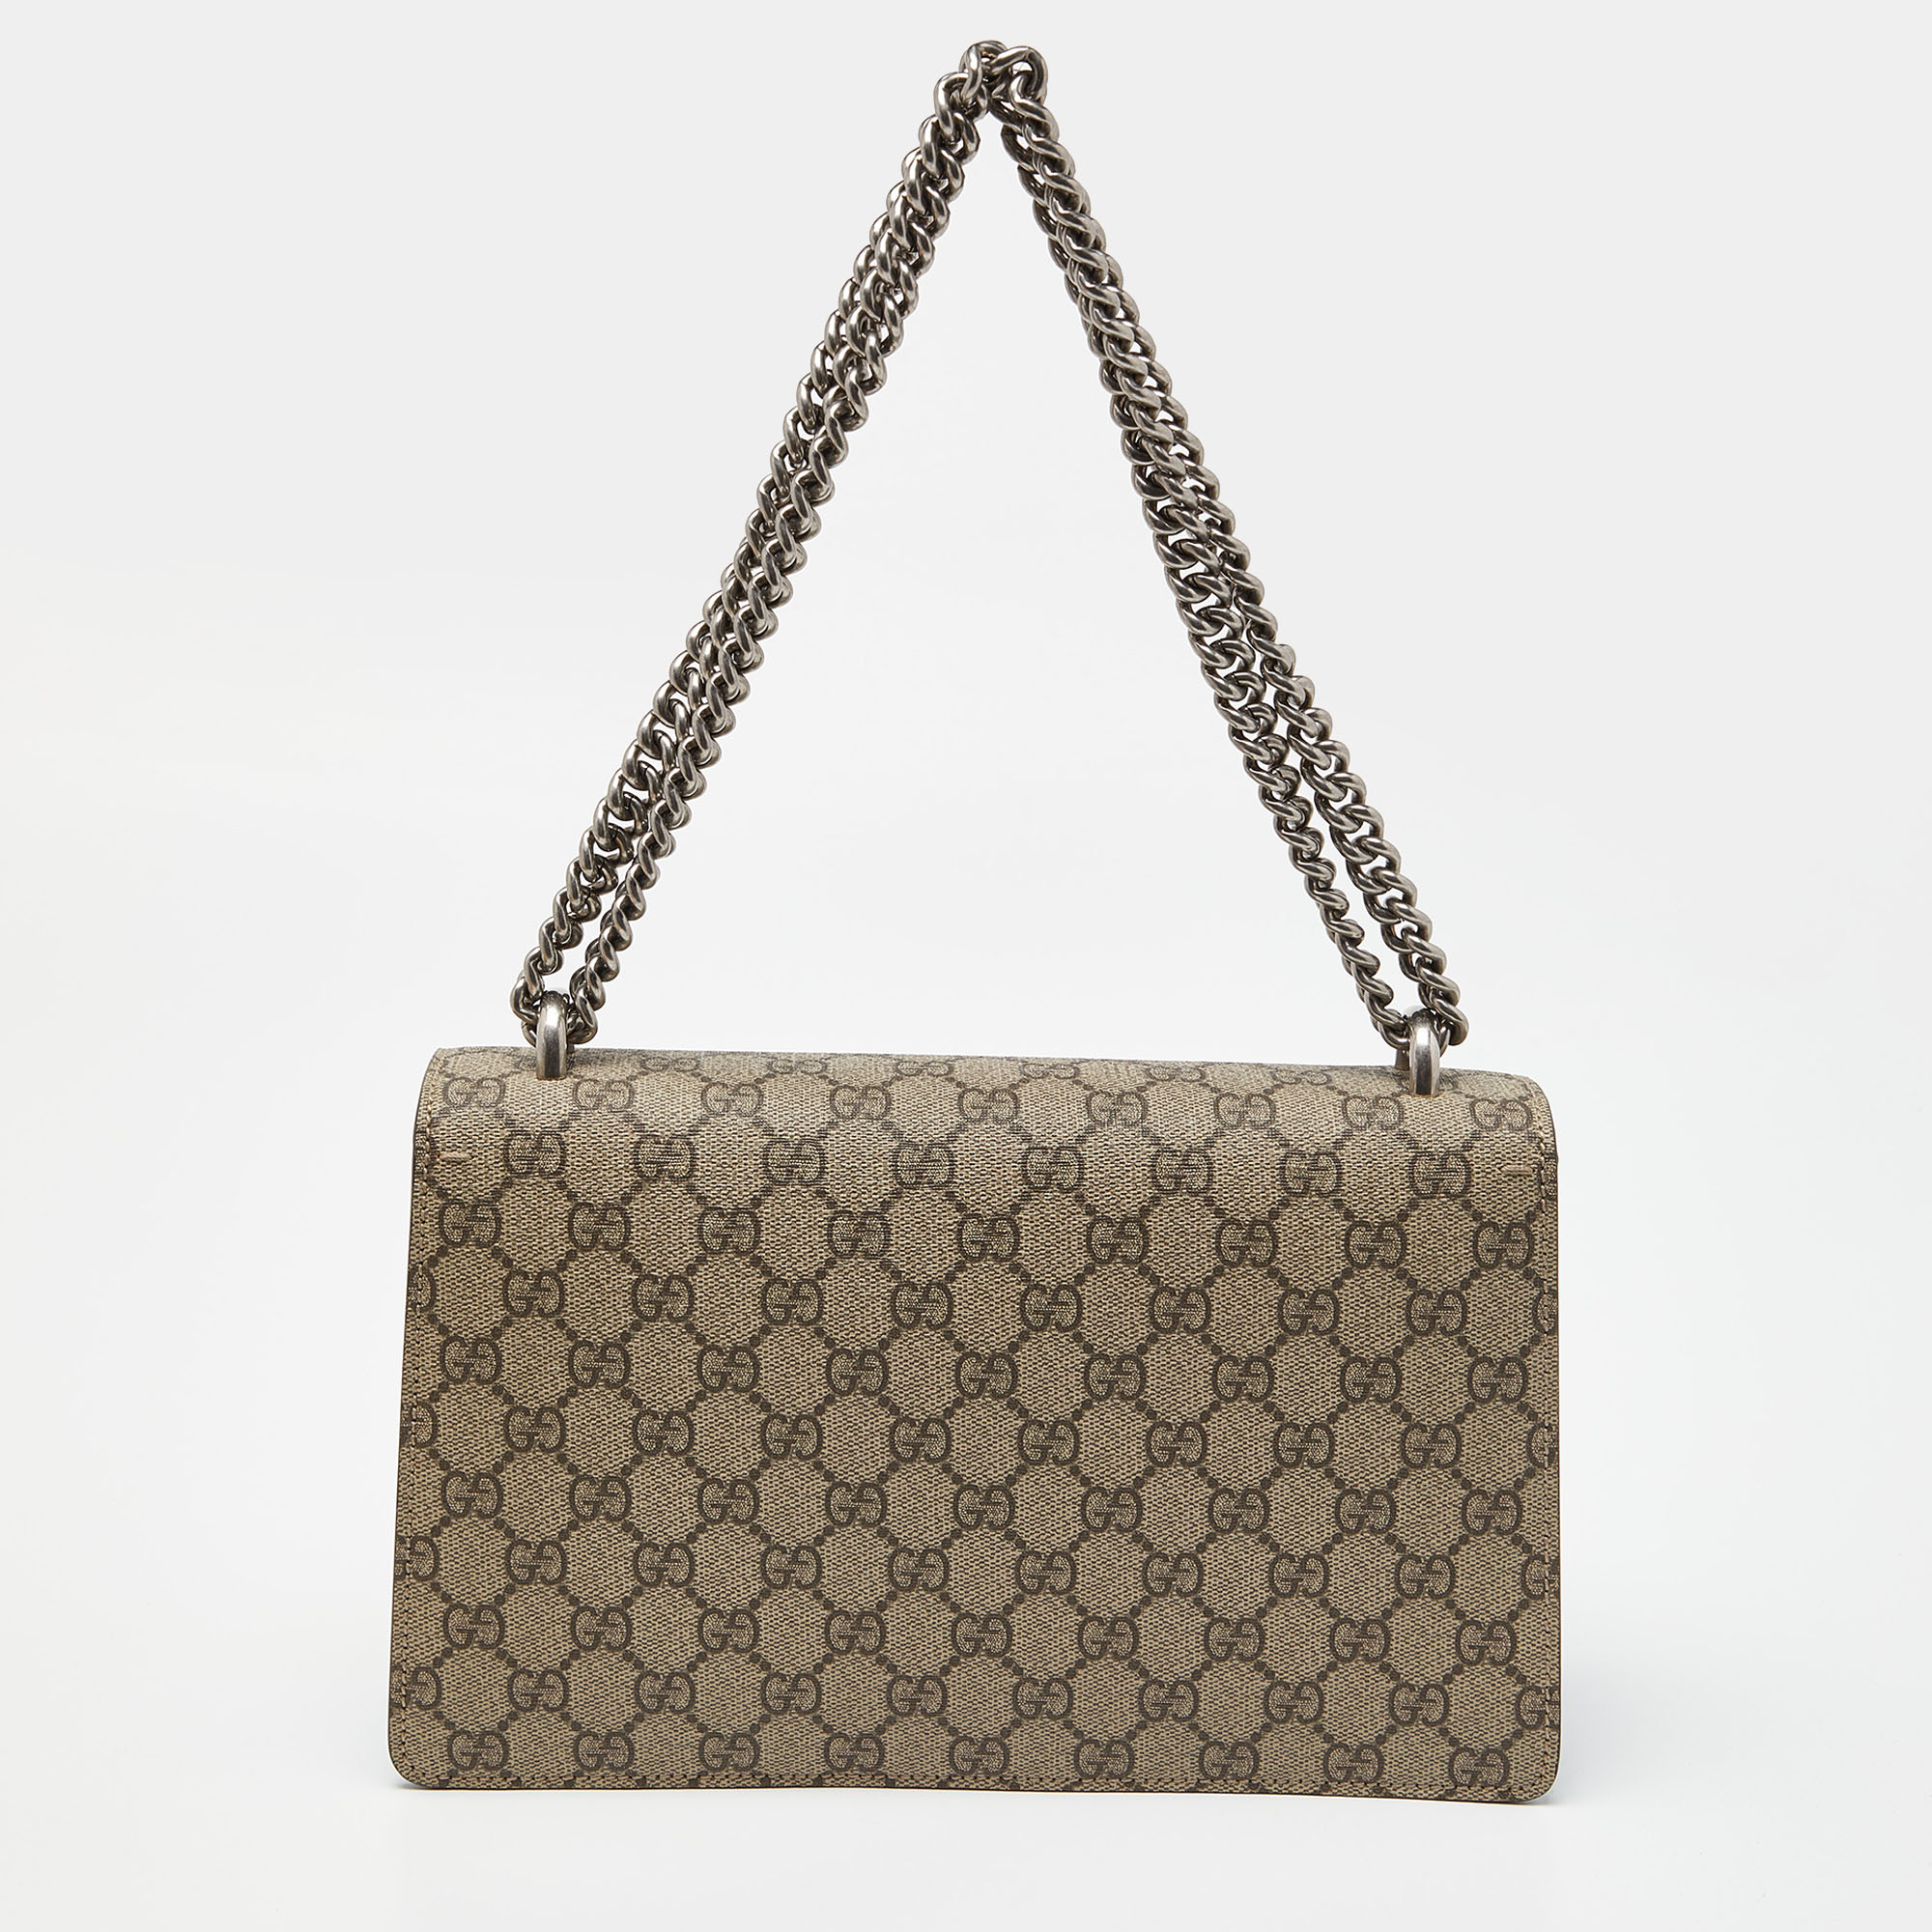 Gucci Beige/Blue GG Supreme Canvas And Suede Small Dionysus Shoulder Bag